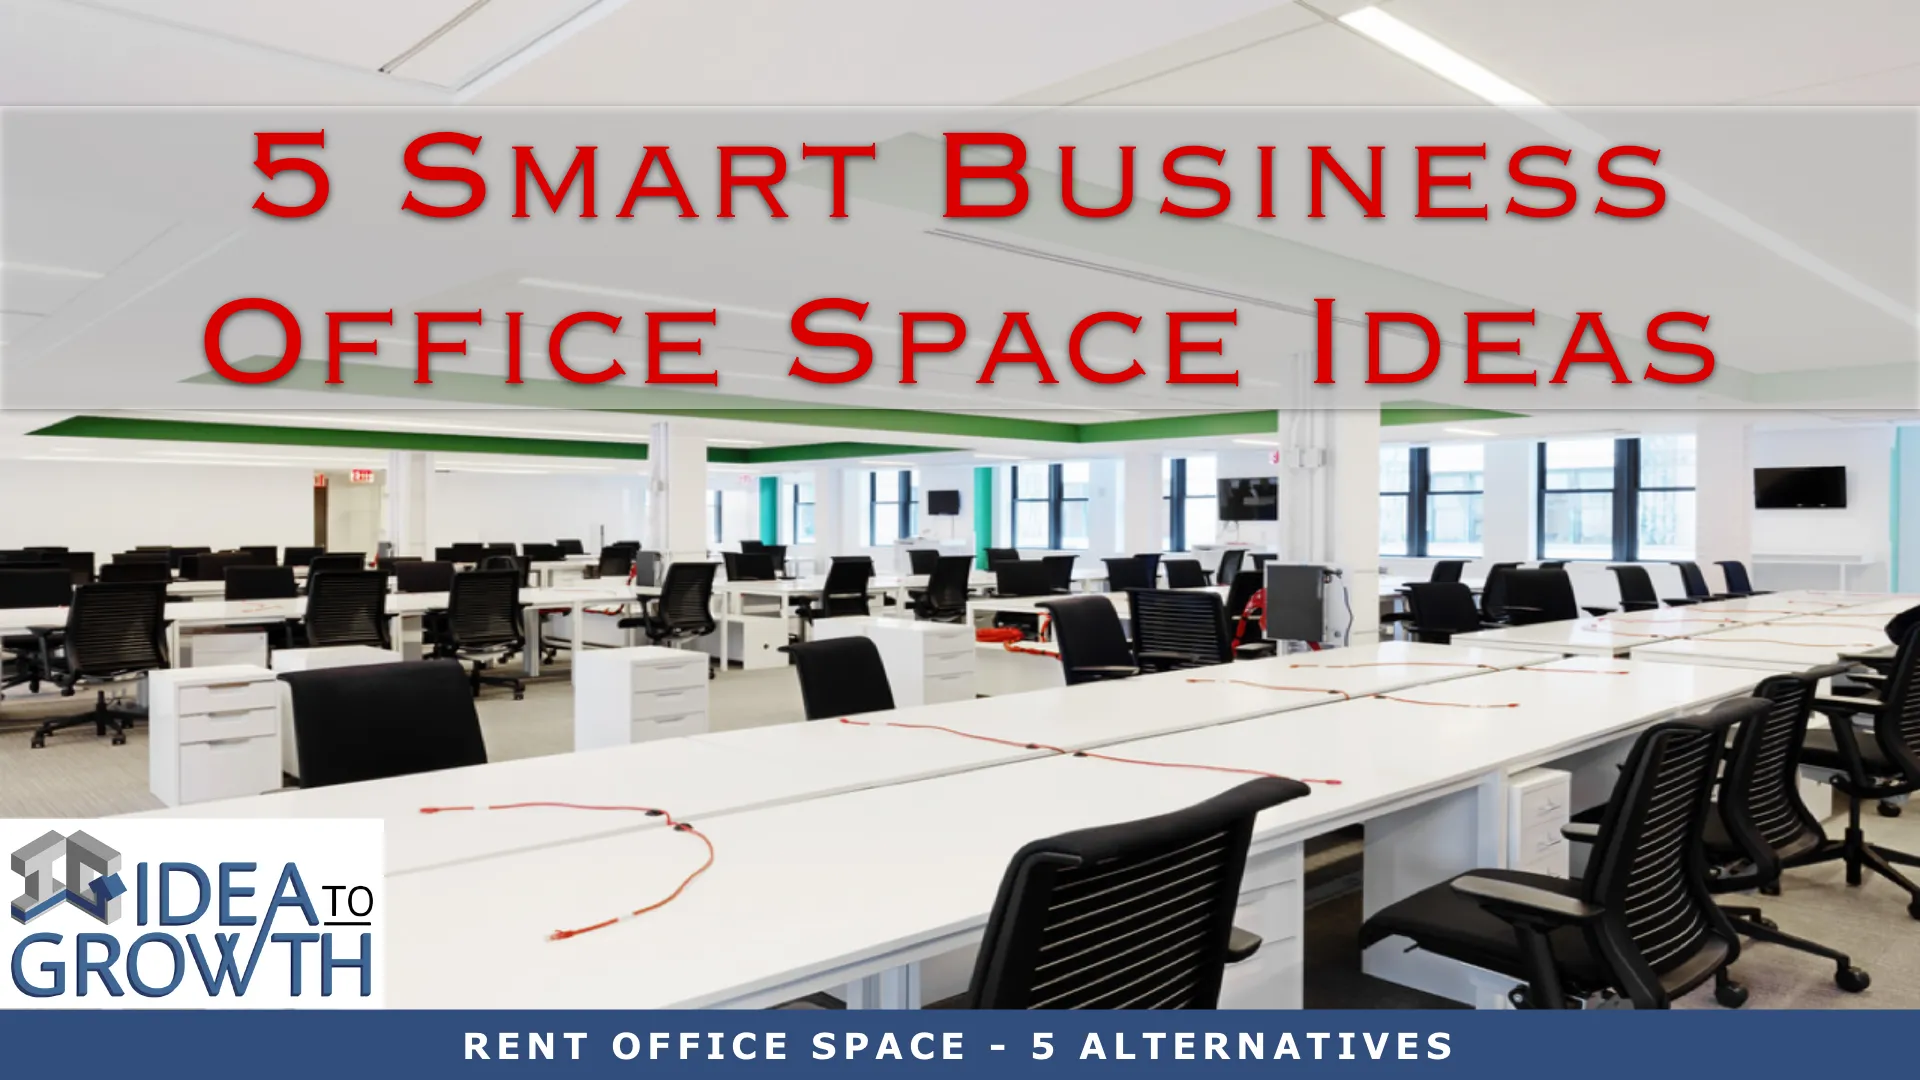 RENT OFFICE SPACE - 5 ALTERNATIVES